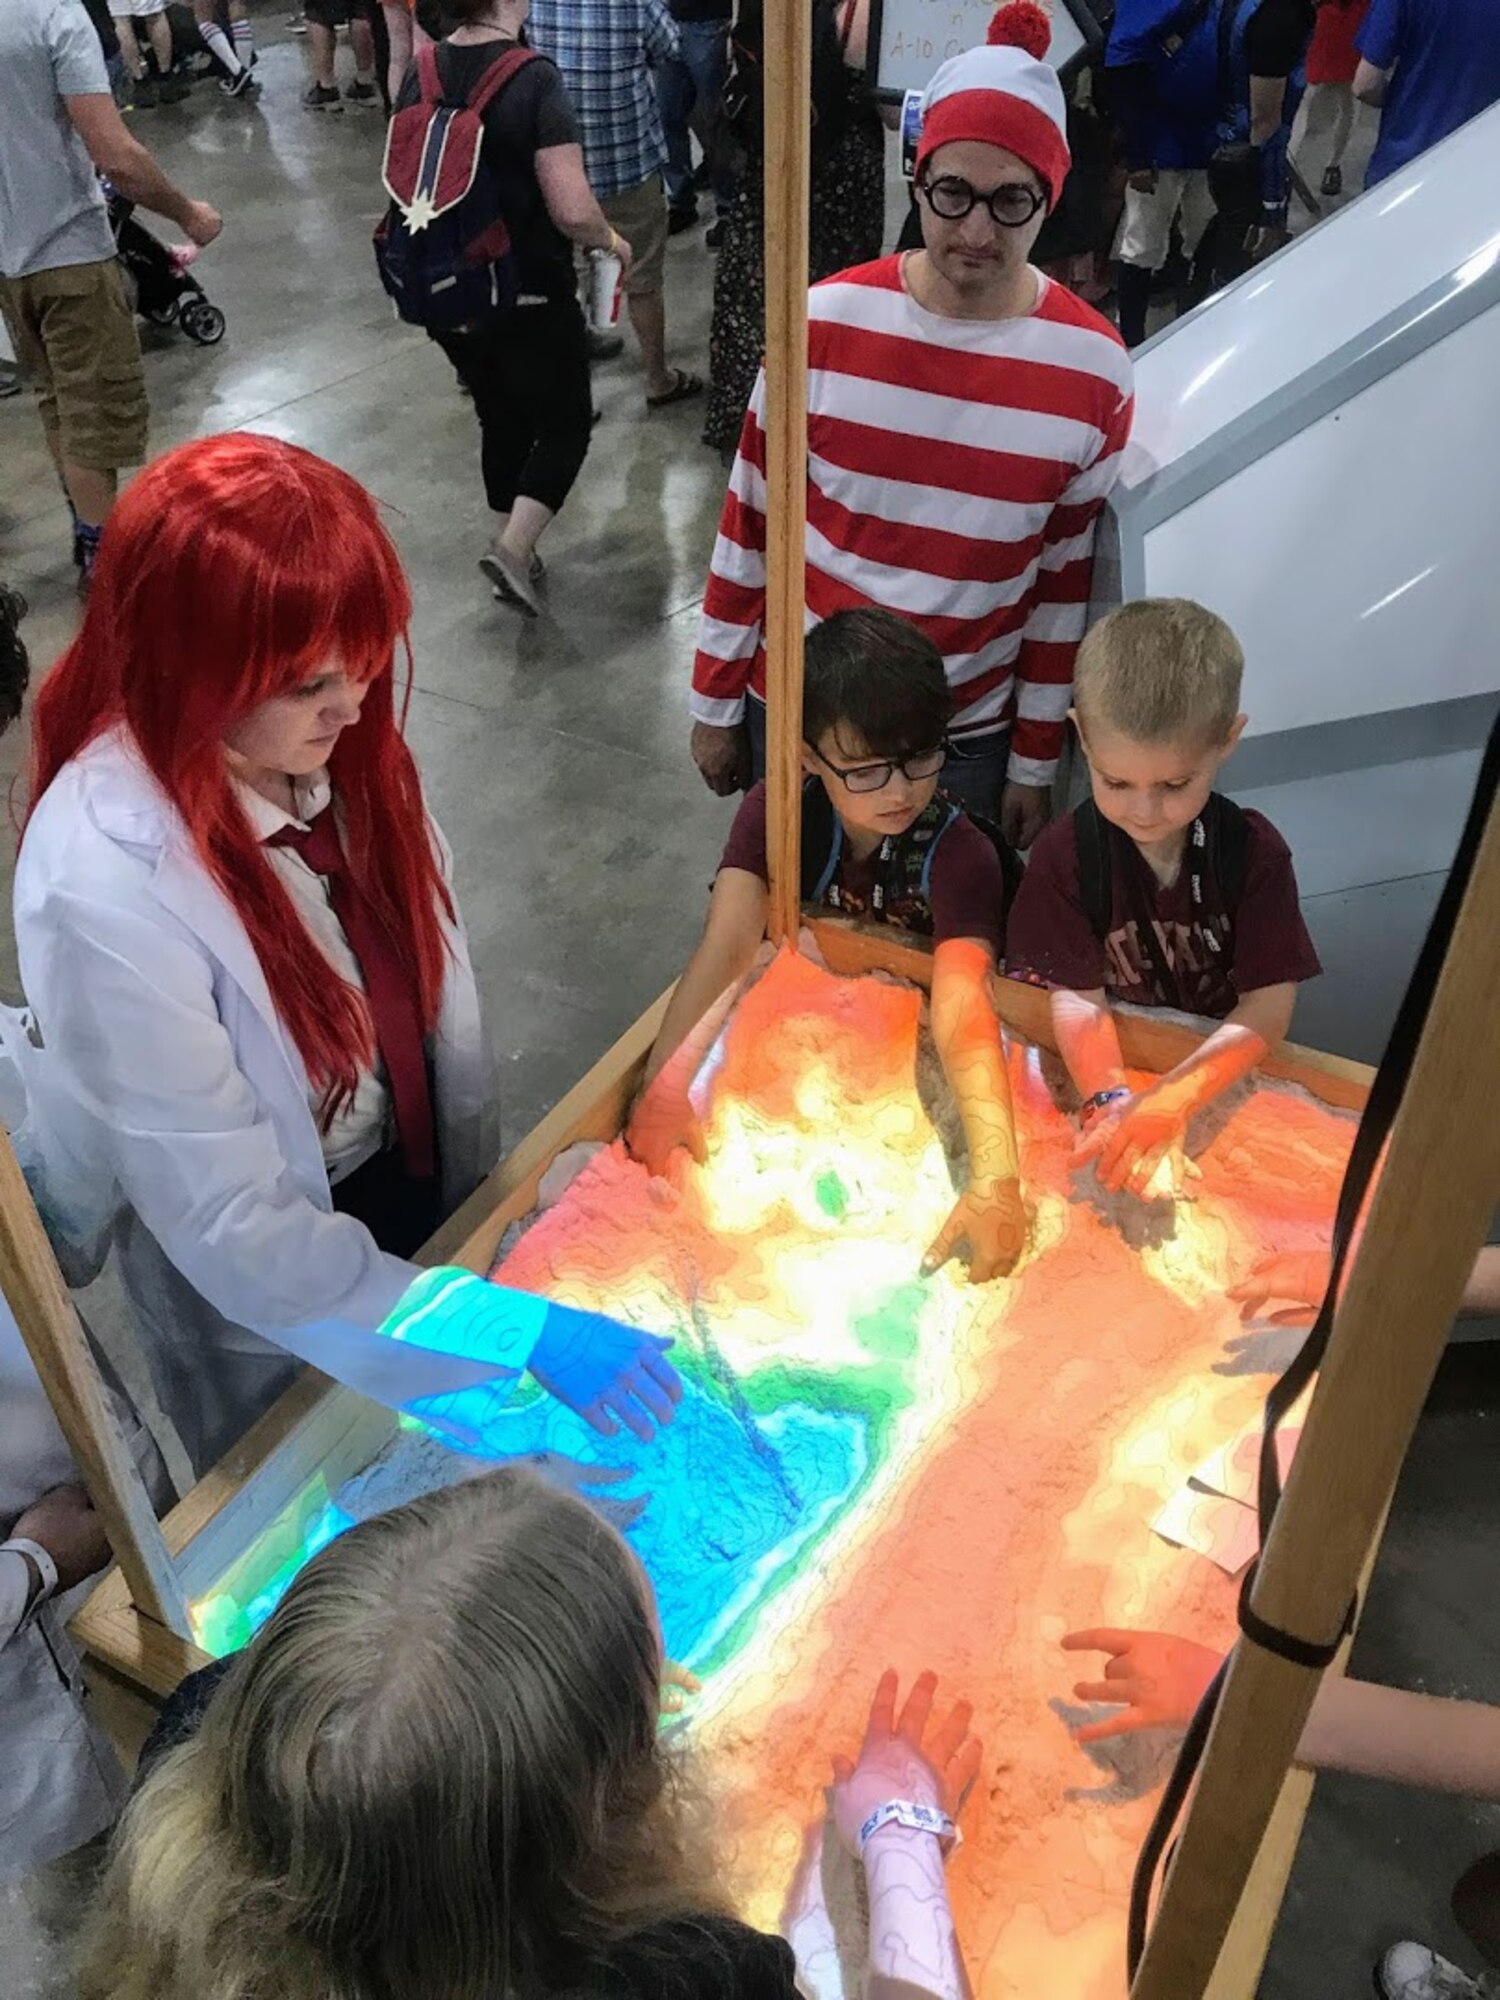 Participants at the 2019 FanX event play with a 3D interactive topographical map sandbox the Hill Air Force Base Science, Technology, Engineering and Math exhibit.  The event, which  was held at the Salt Palace Convention Center Sept. 5-7, drew thousands of visitors, providing great exposure for Hill and its STEM programs.